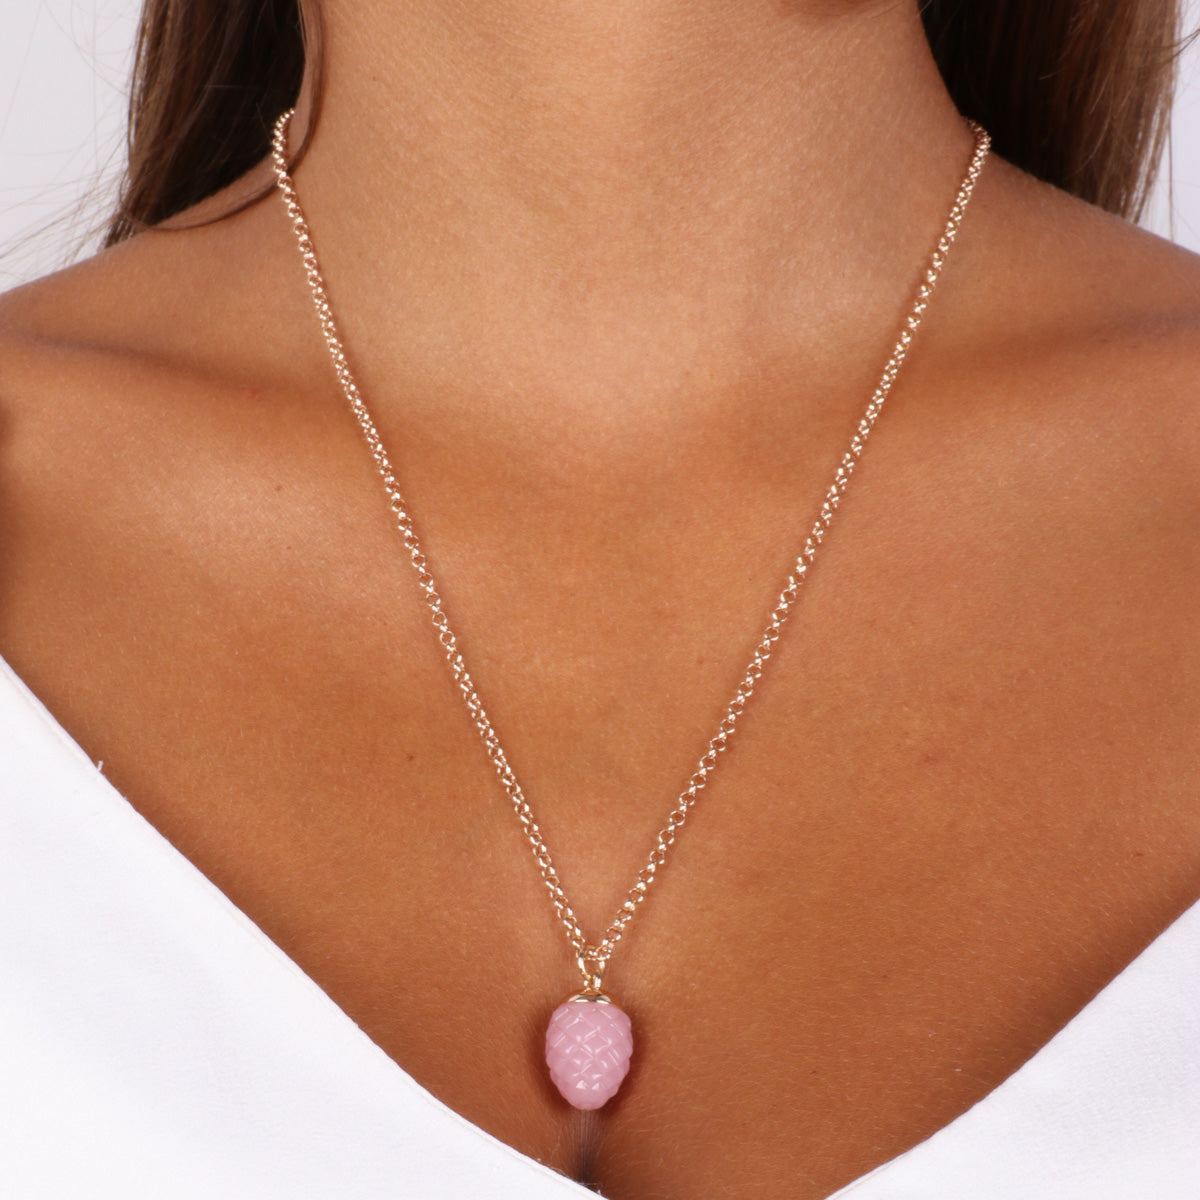 Metal necklace with pink charming pine -shaped pendant